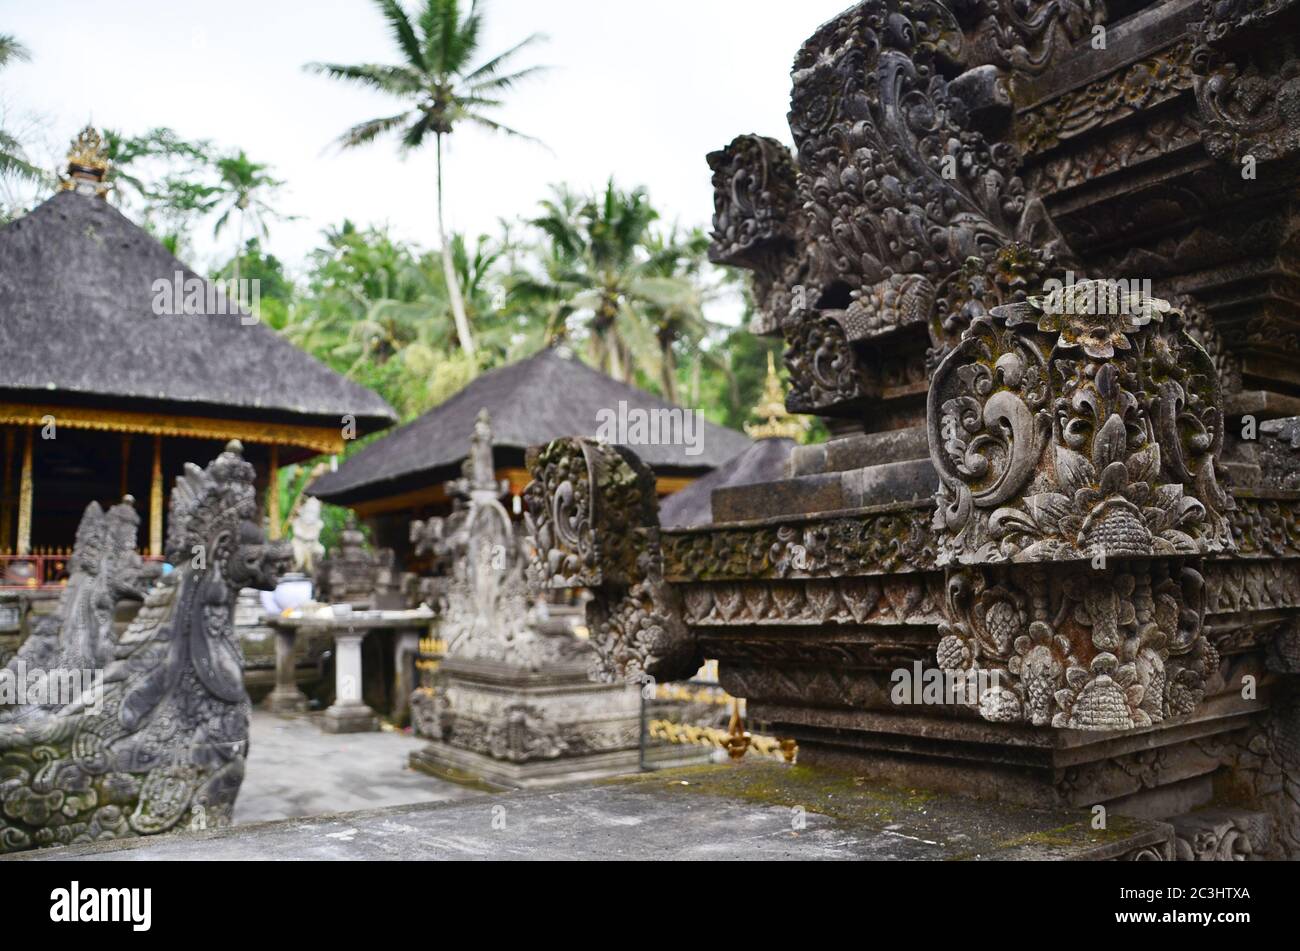 Ancient statue and carving in Hindu temple Pura Tirta Empul, Bali, Indonesia. Stock Photo